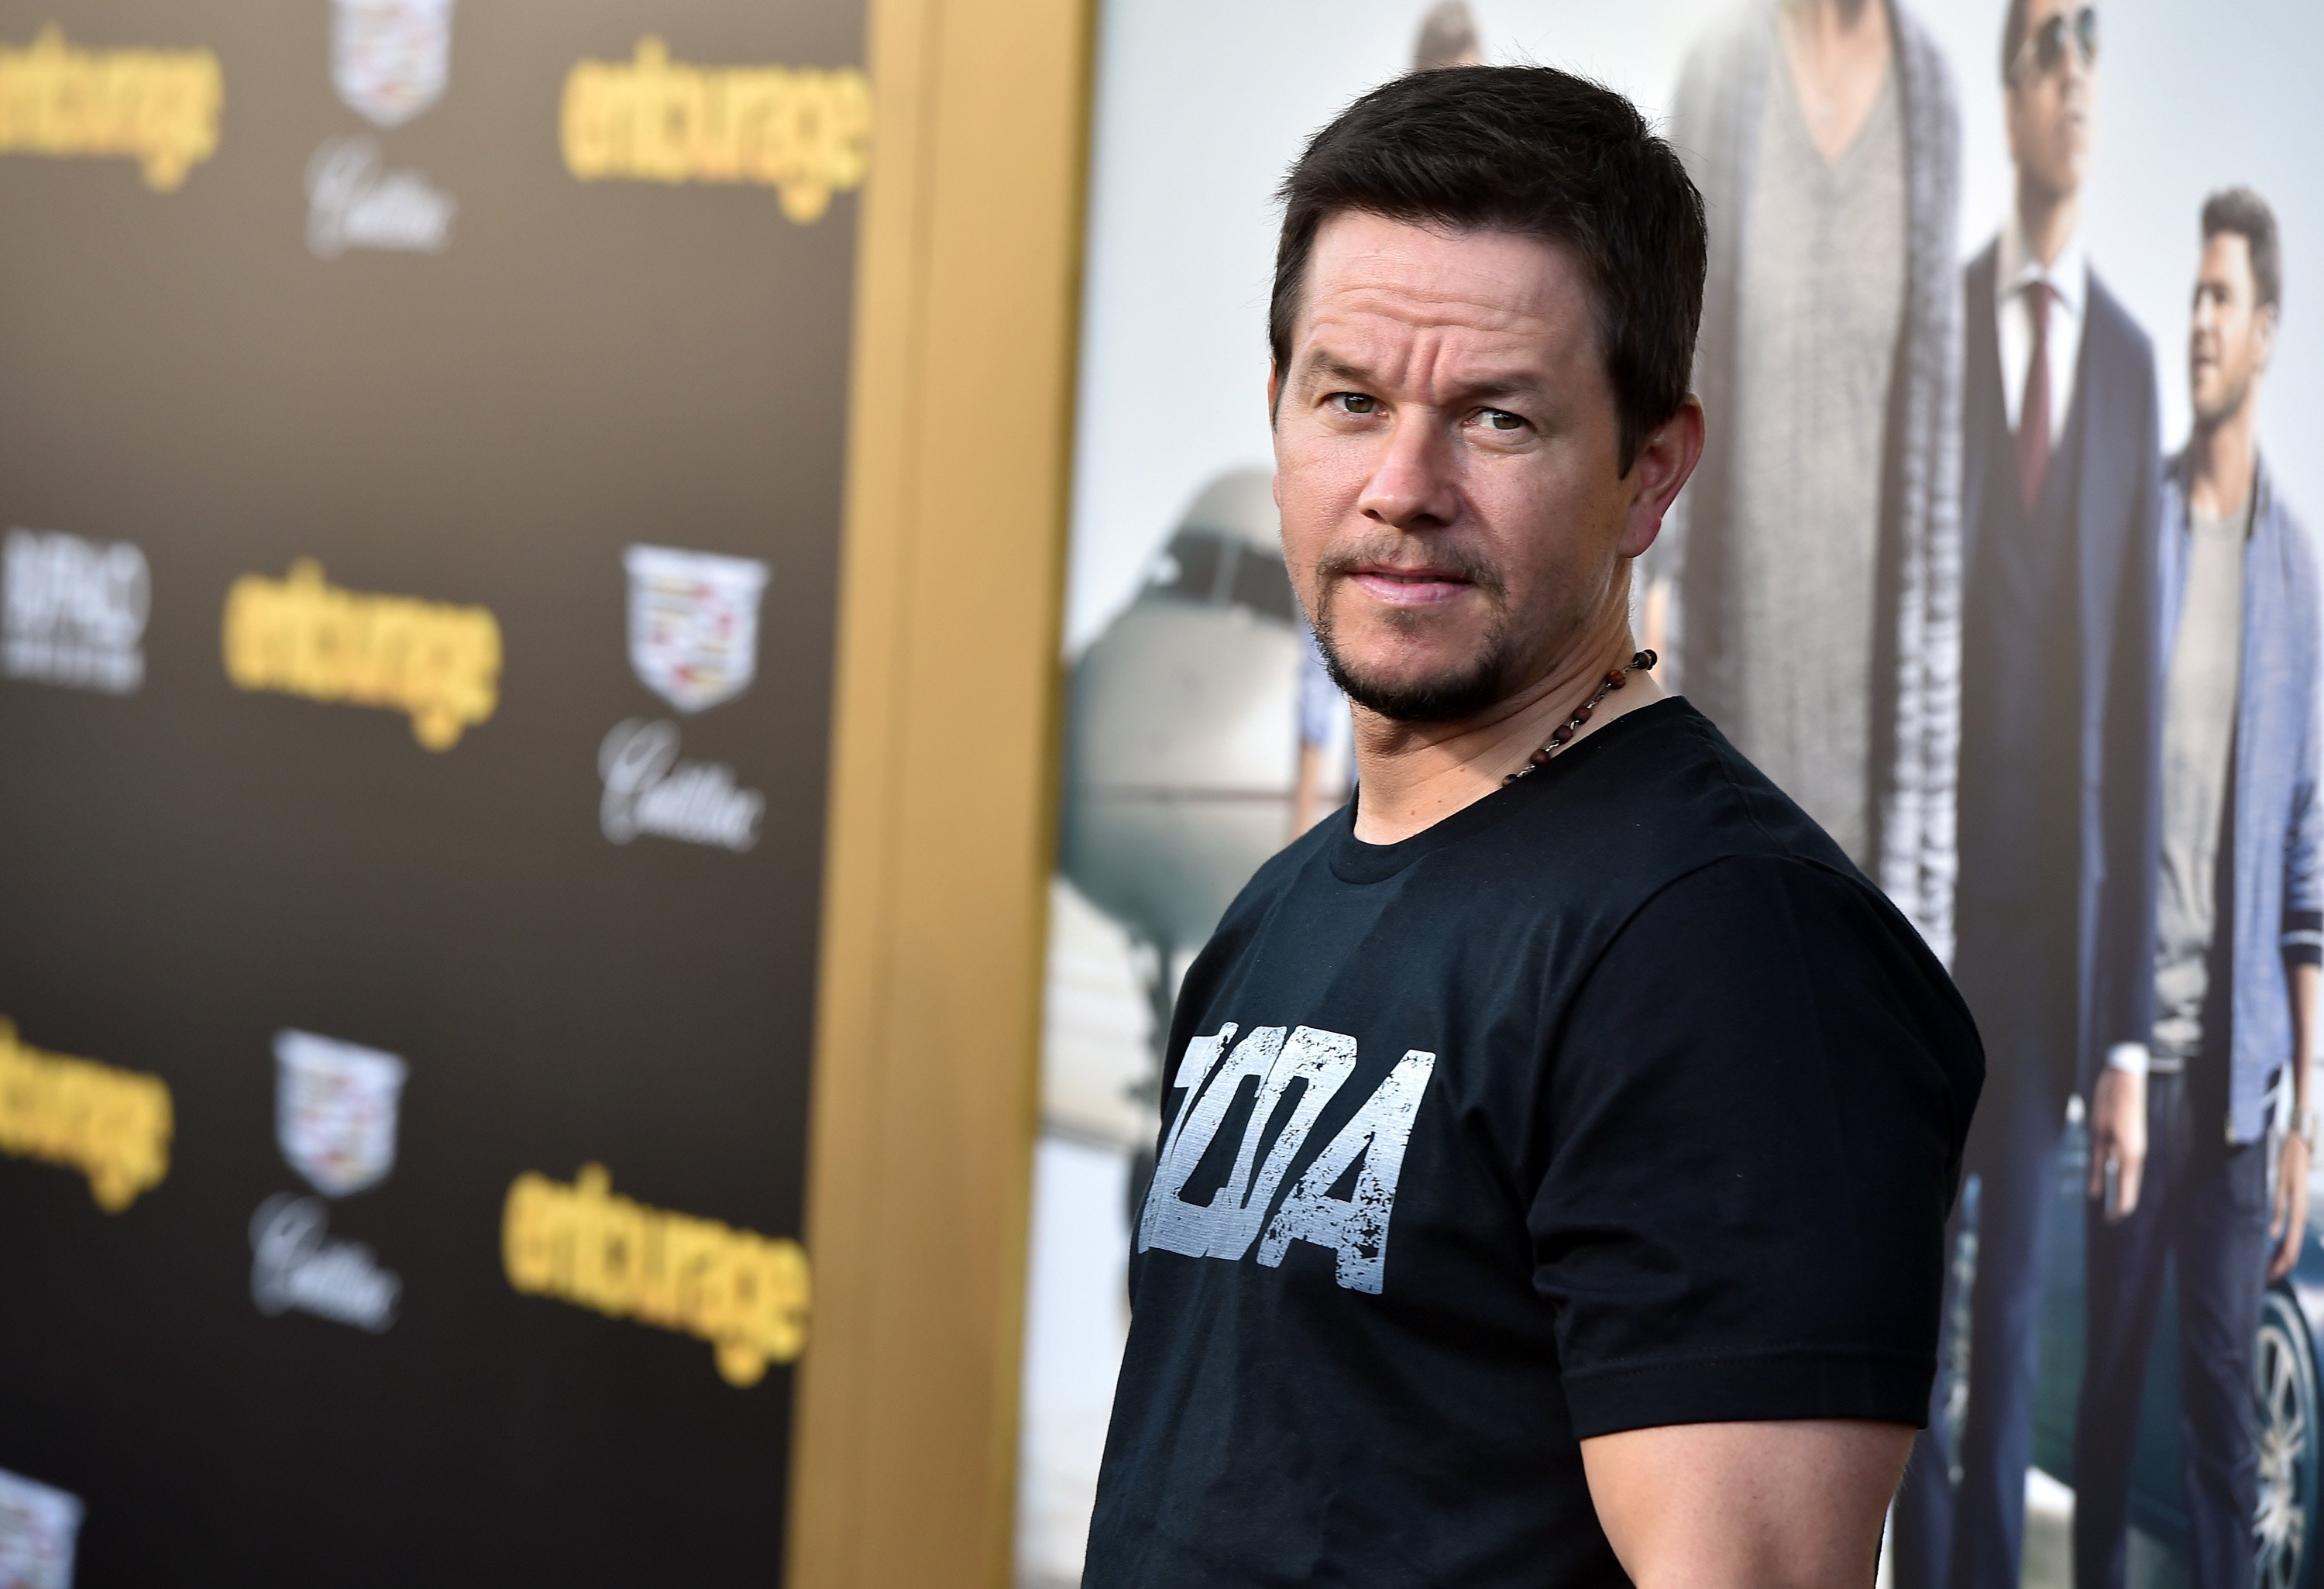 Mark Wahlberg attends the premiere of Warner Bros. Pictures' "Entourage" on June 1, 2015, in Westwood, California. | Photo: Getty Images.